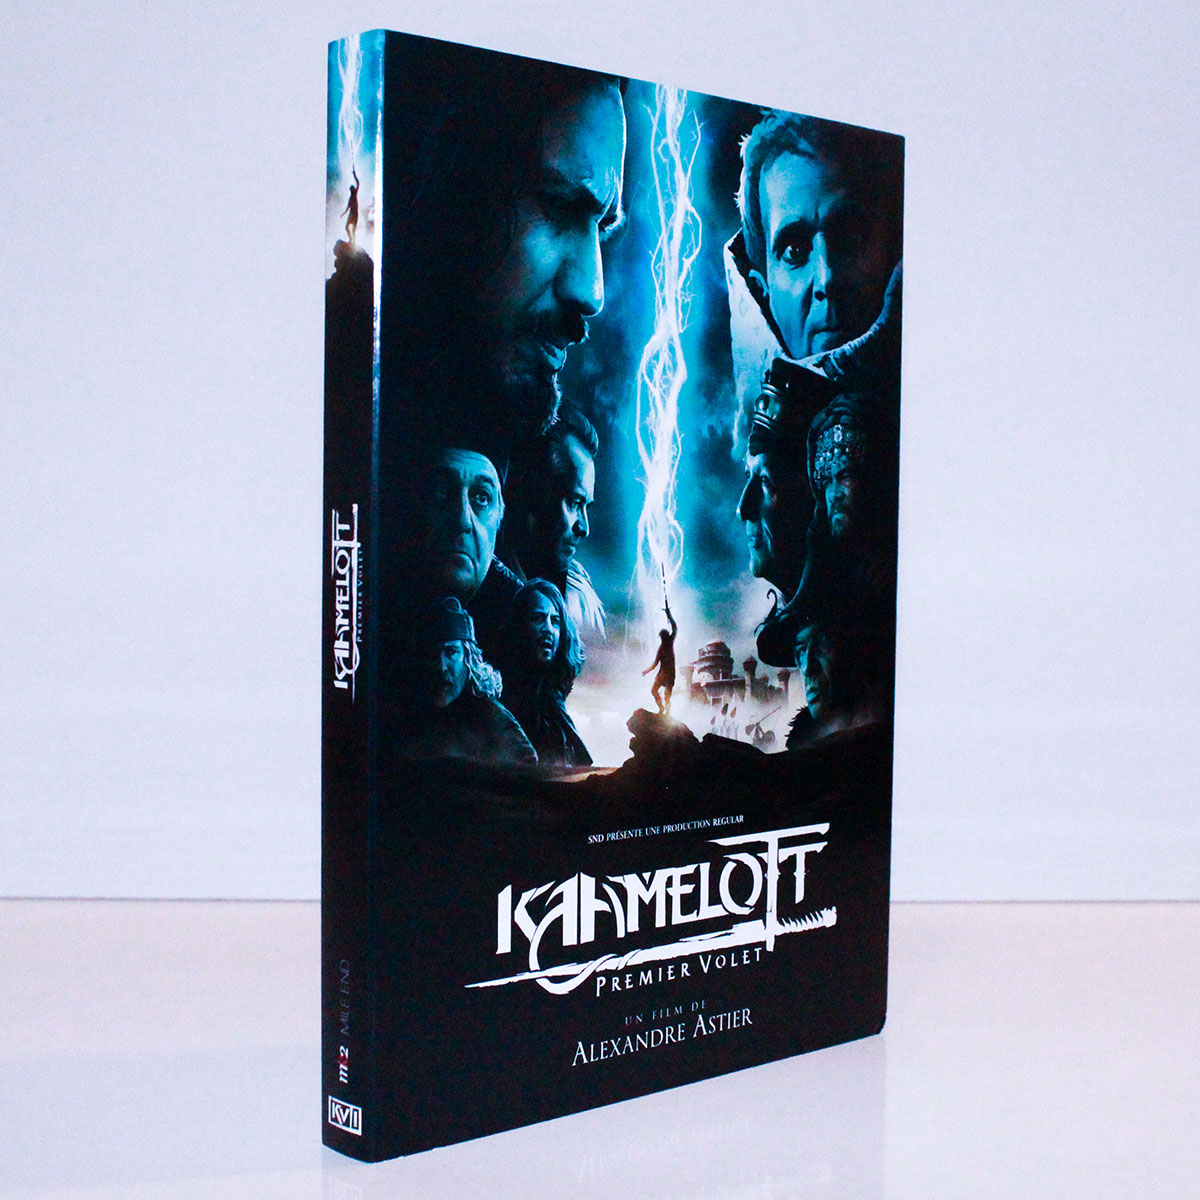 Printed O-Cards for DVD cases (digital print)